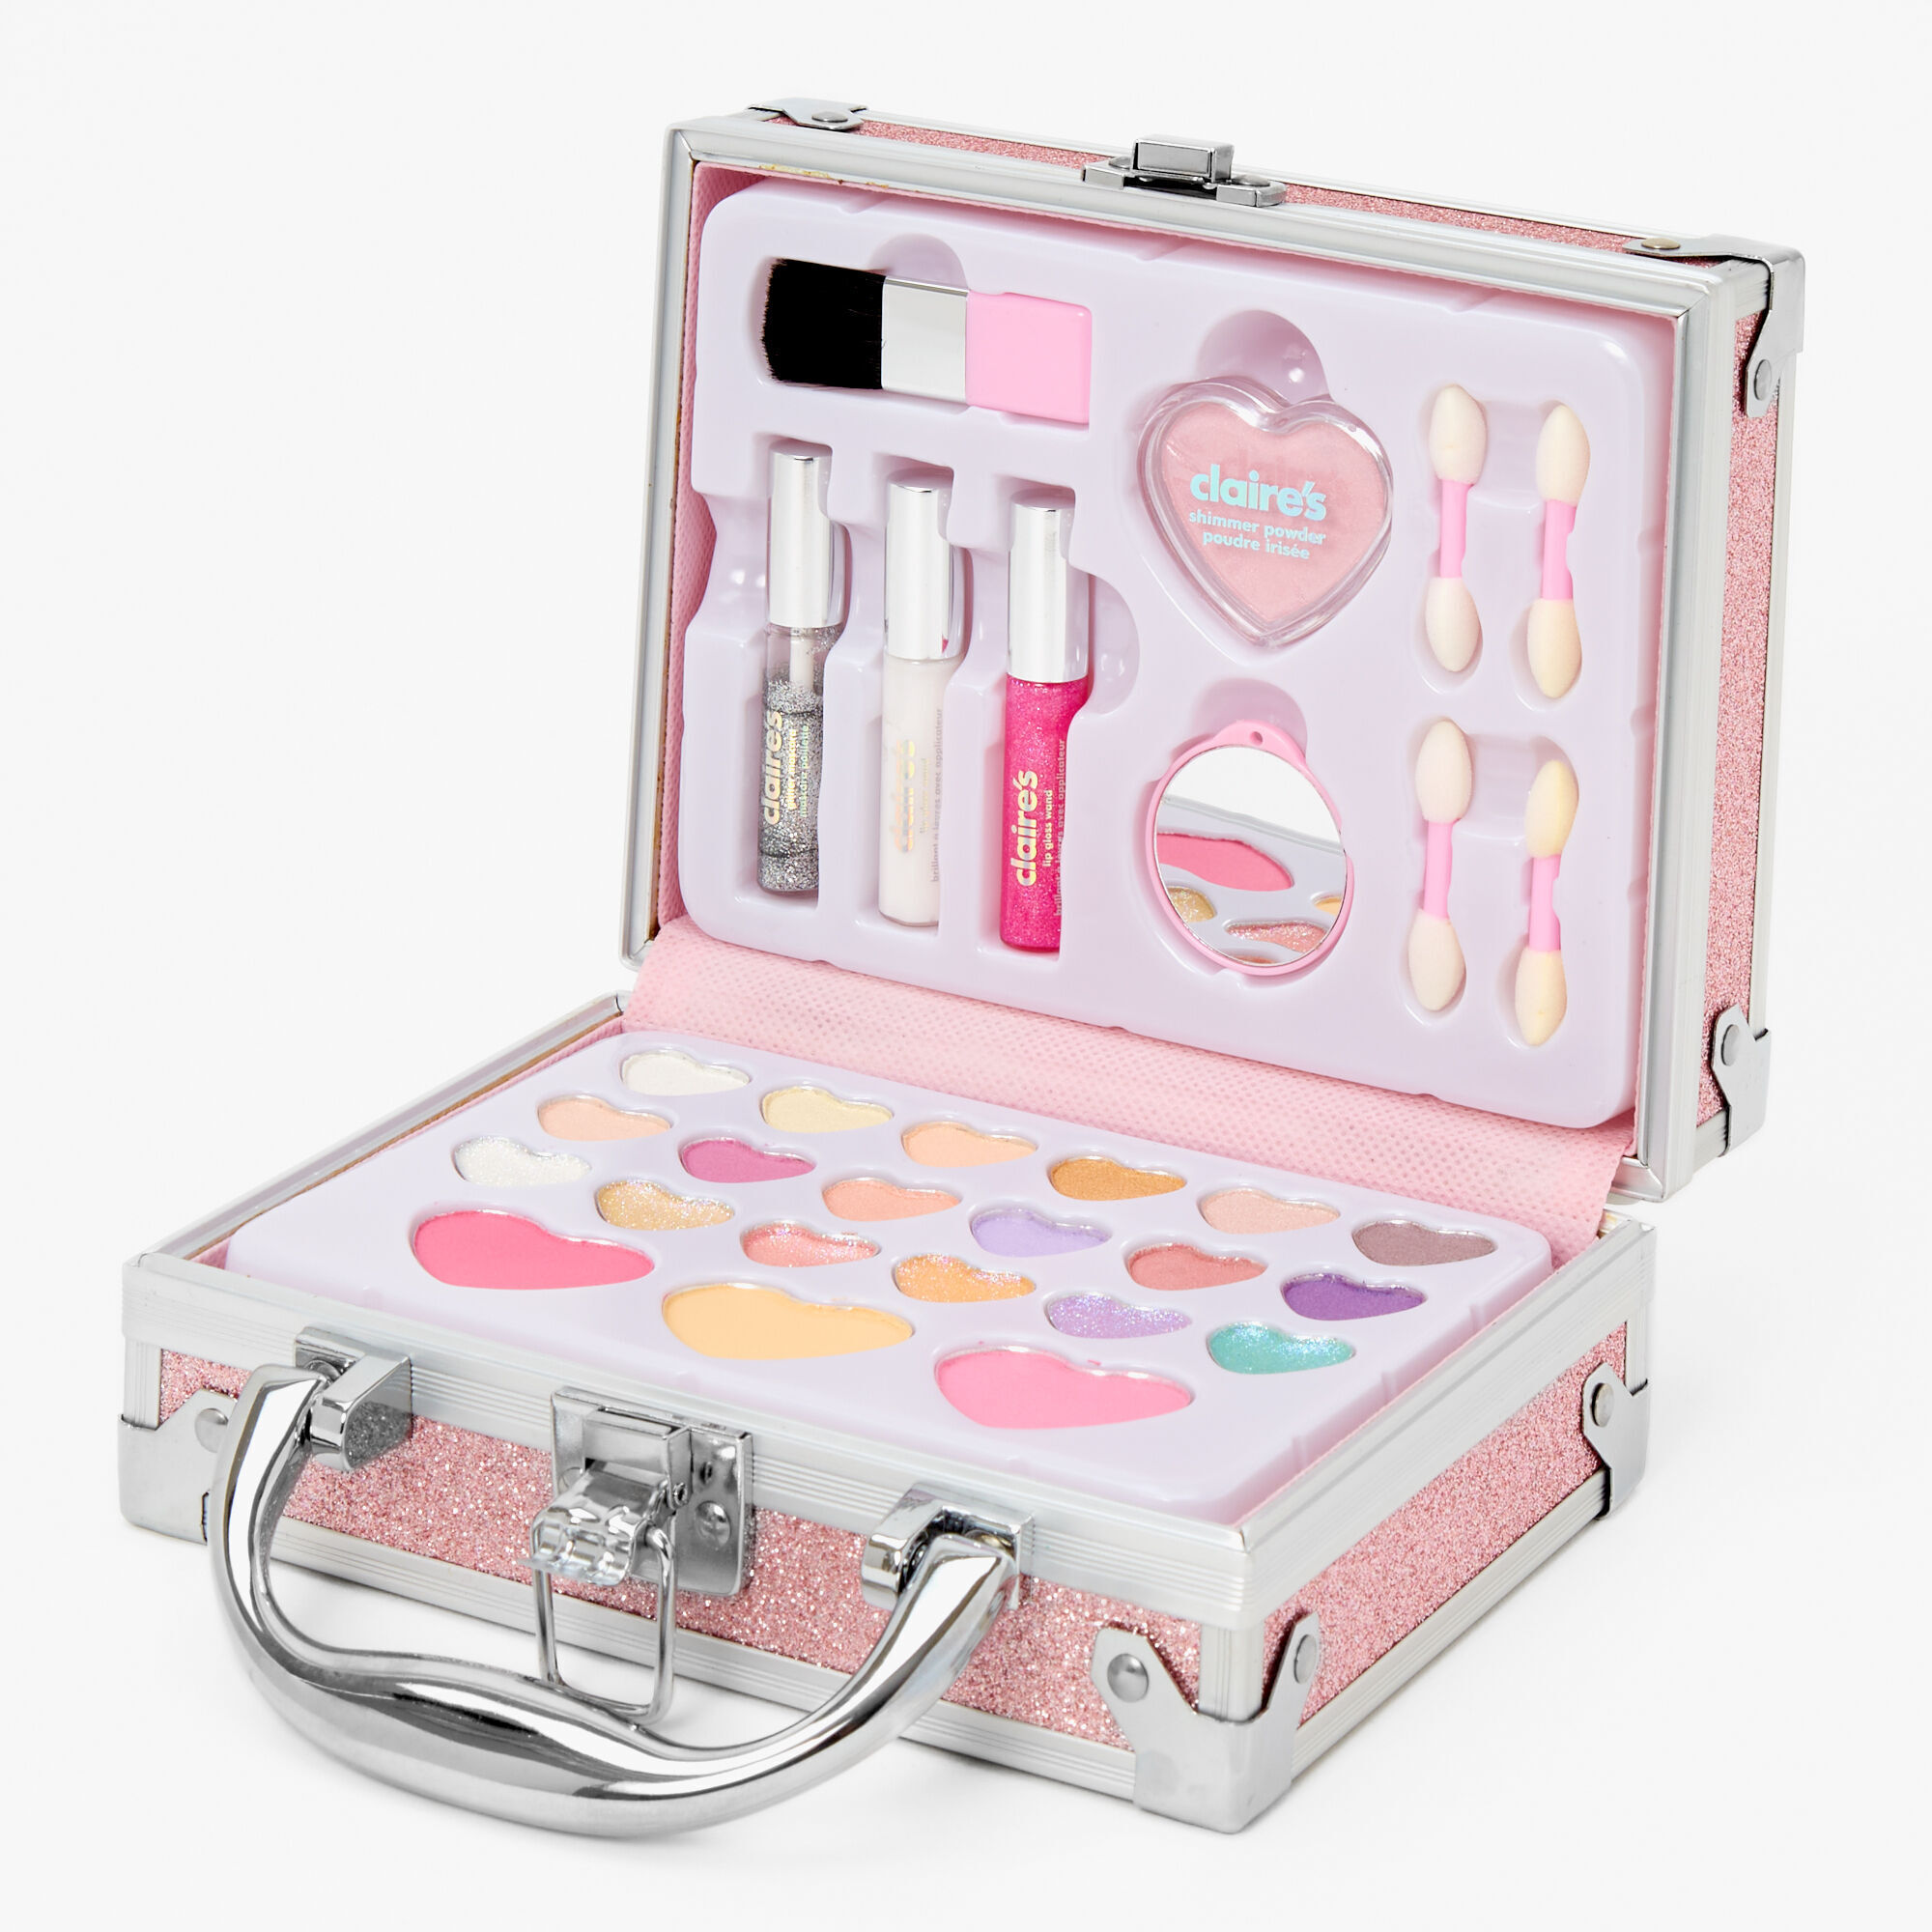 View Claires Glitter Travel Case Makeup Set Pink information